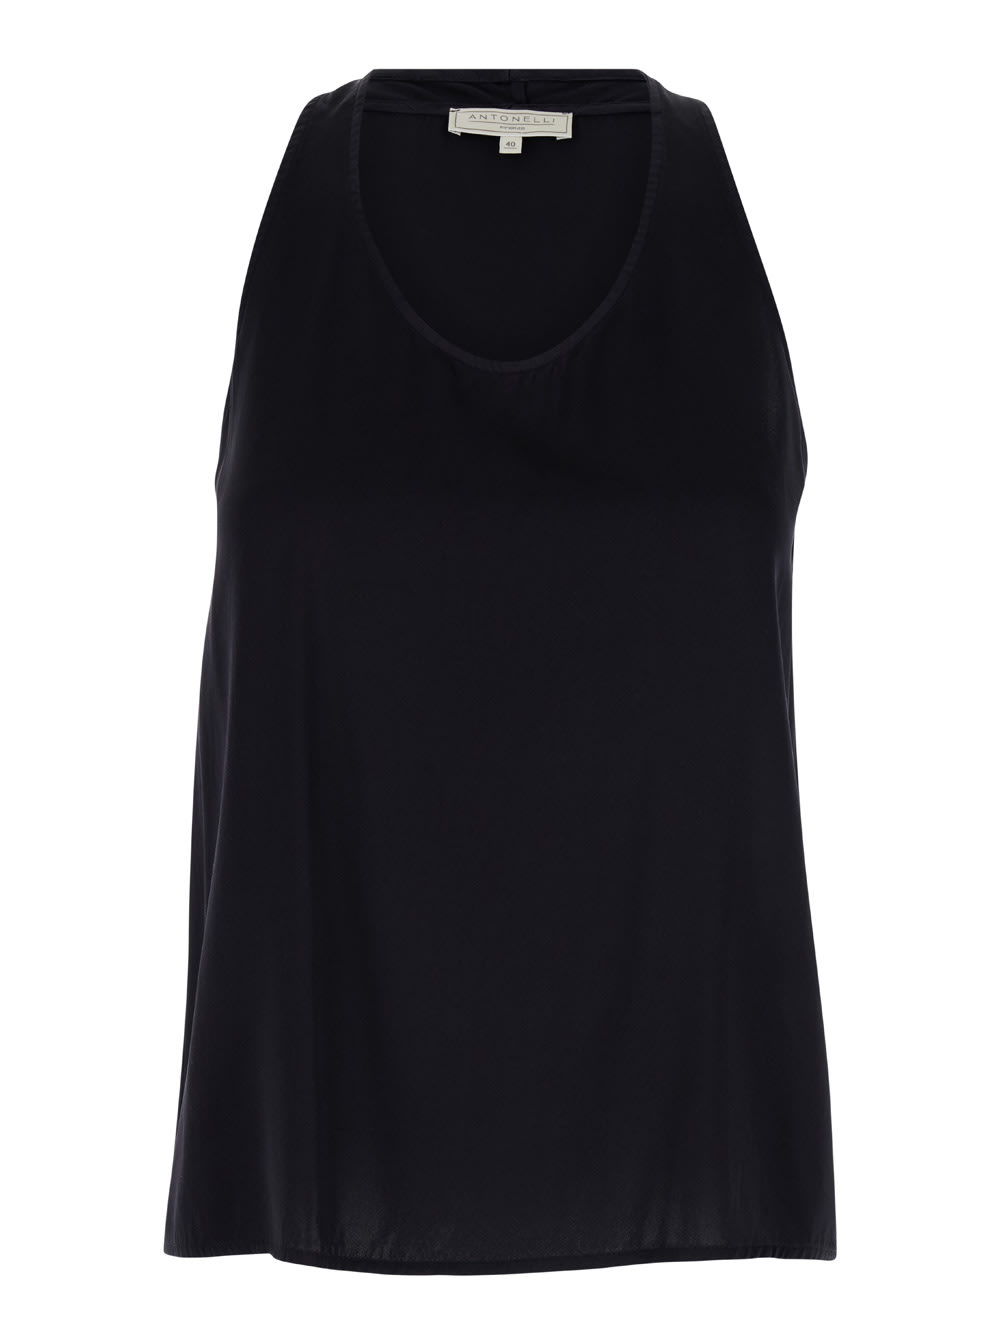 Black Sleeveless And Flared Top In Silk Blend Woman